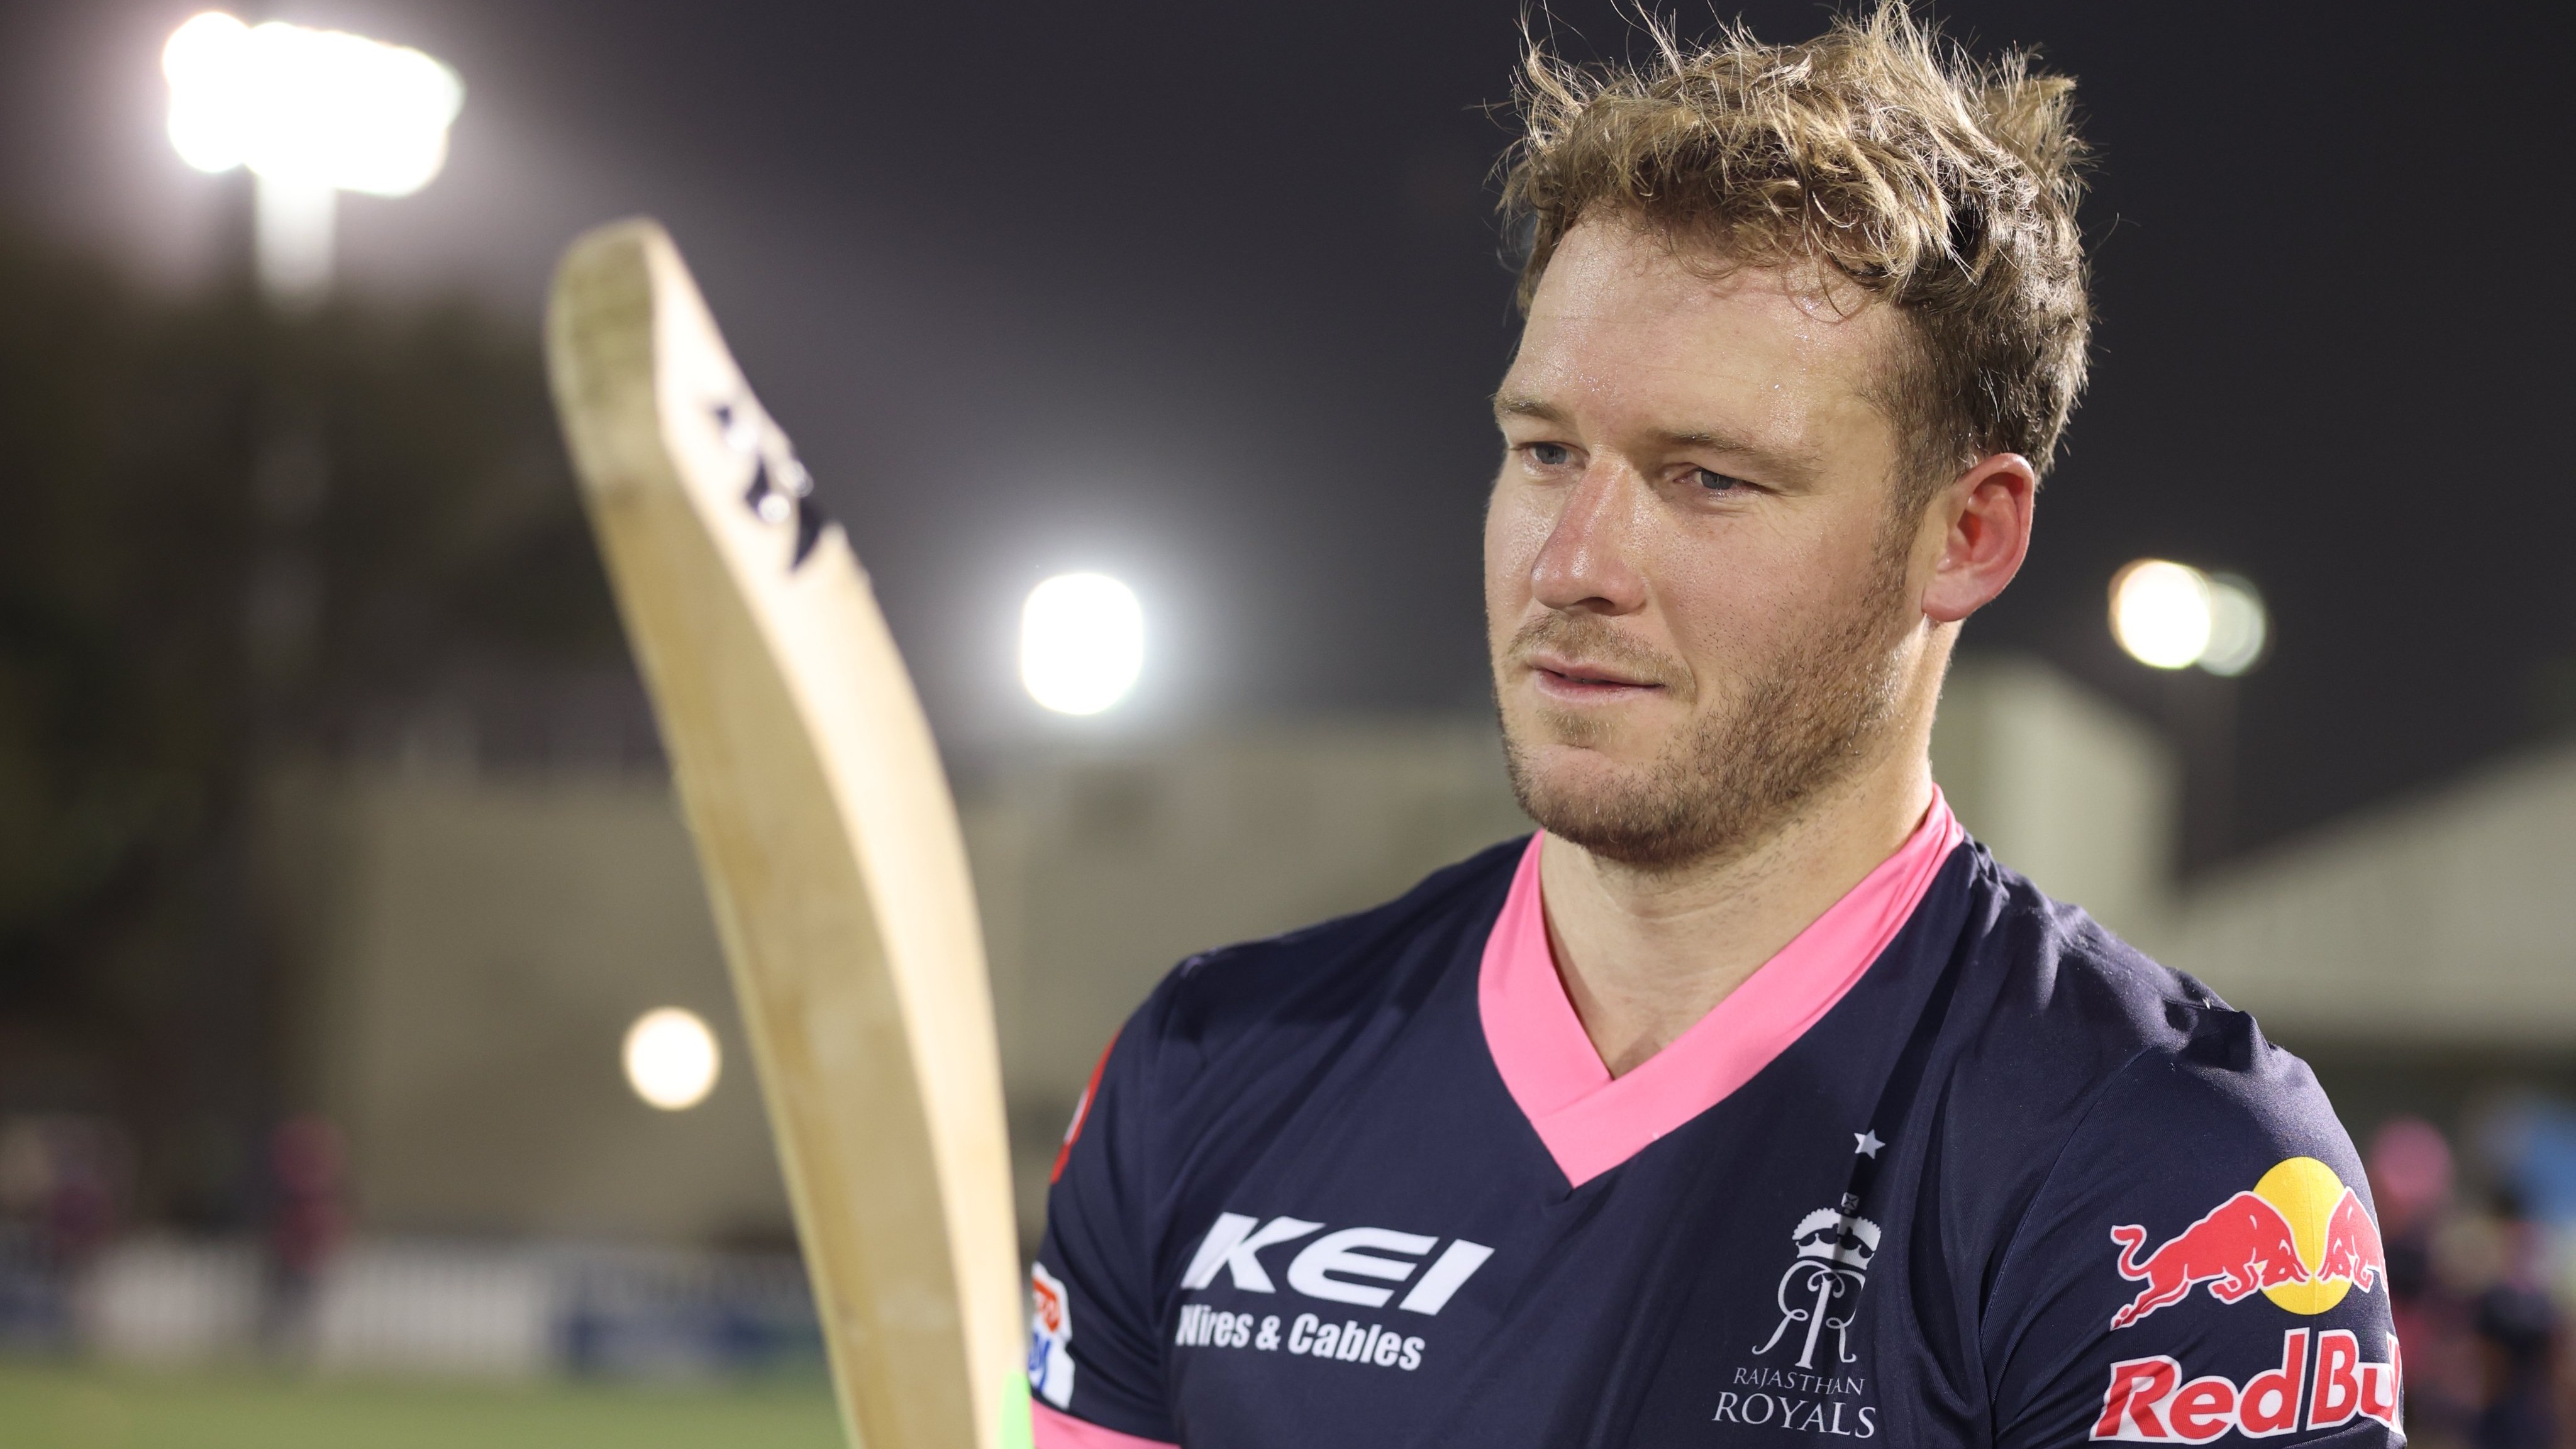 IPL 2020: WATCH- David Miller of Rajasthan Royals speaks about his first net session in UAE